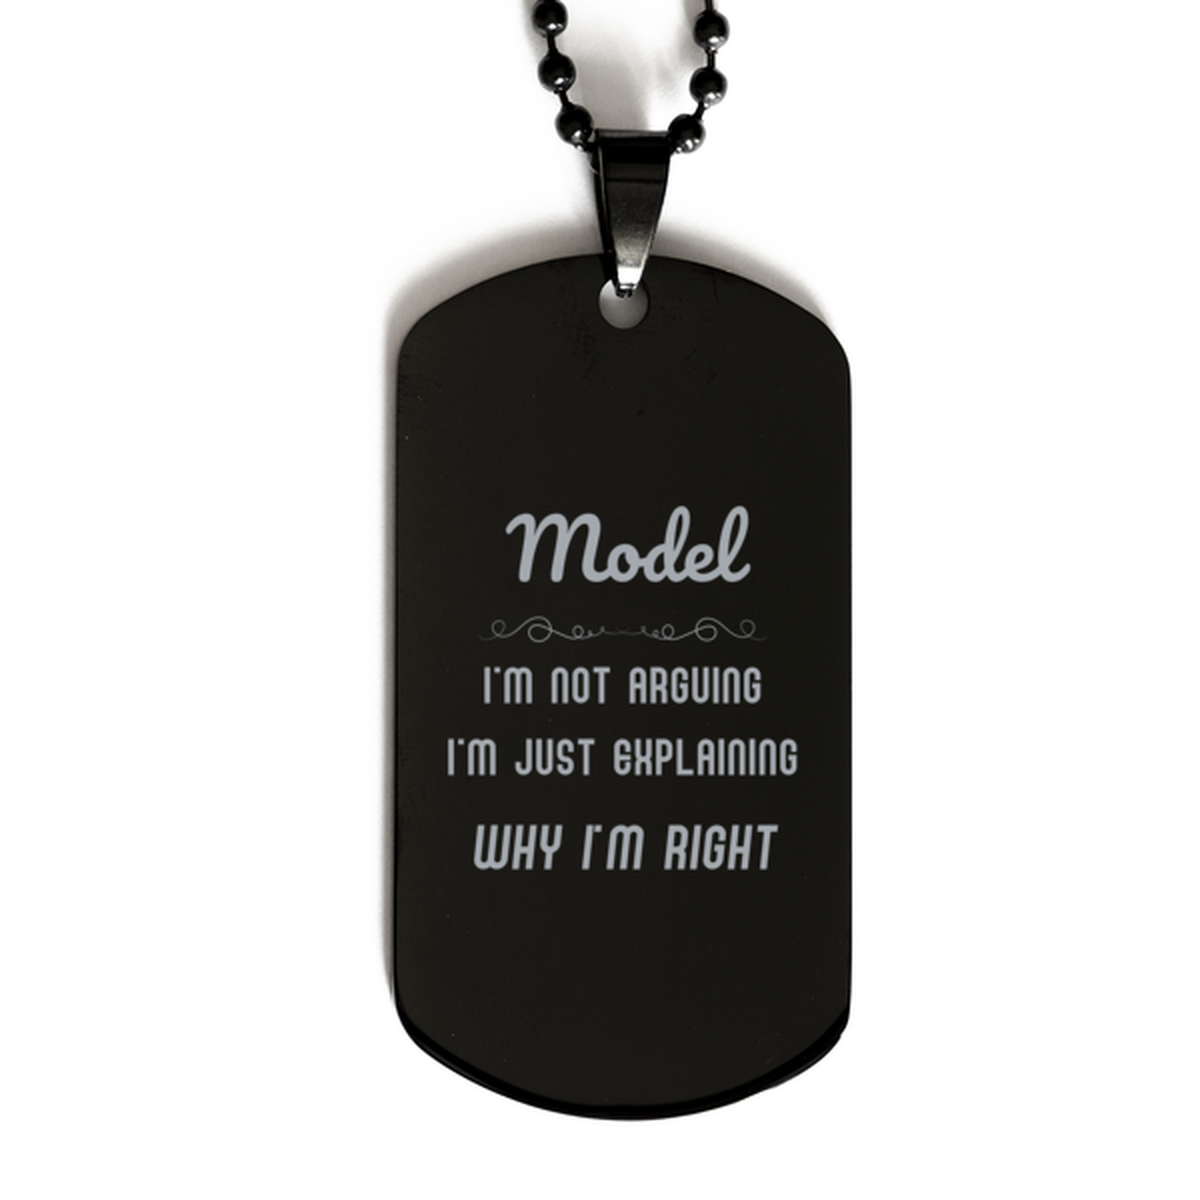 Model I'm not Arguing. I'm Just Explaining Why I'm RIGHT Black Dog Tag, Funny Saying Quote Model Gifts For Model Graduation Birthday Christmas Gifts for Men Women Coworker